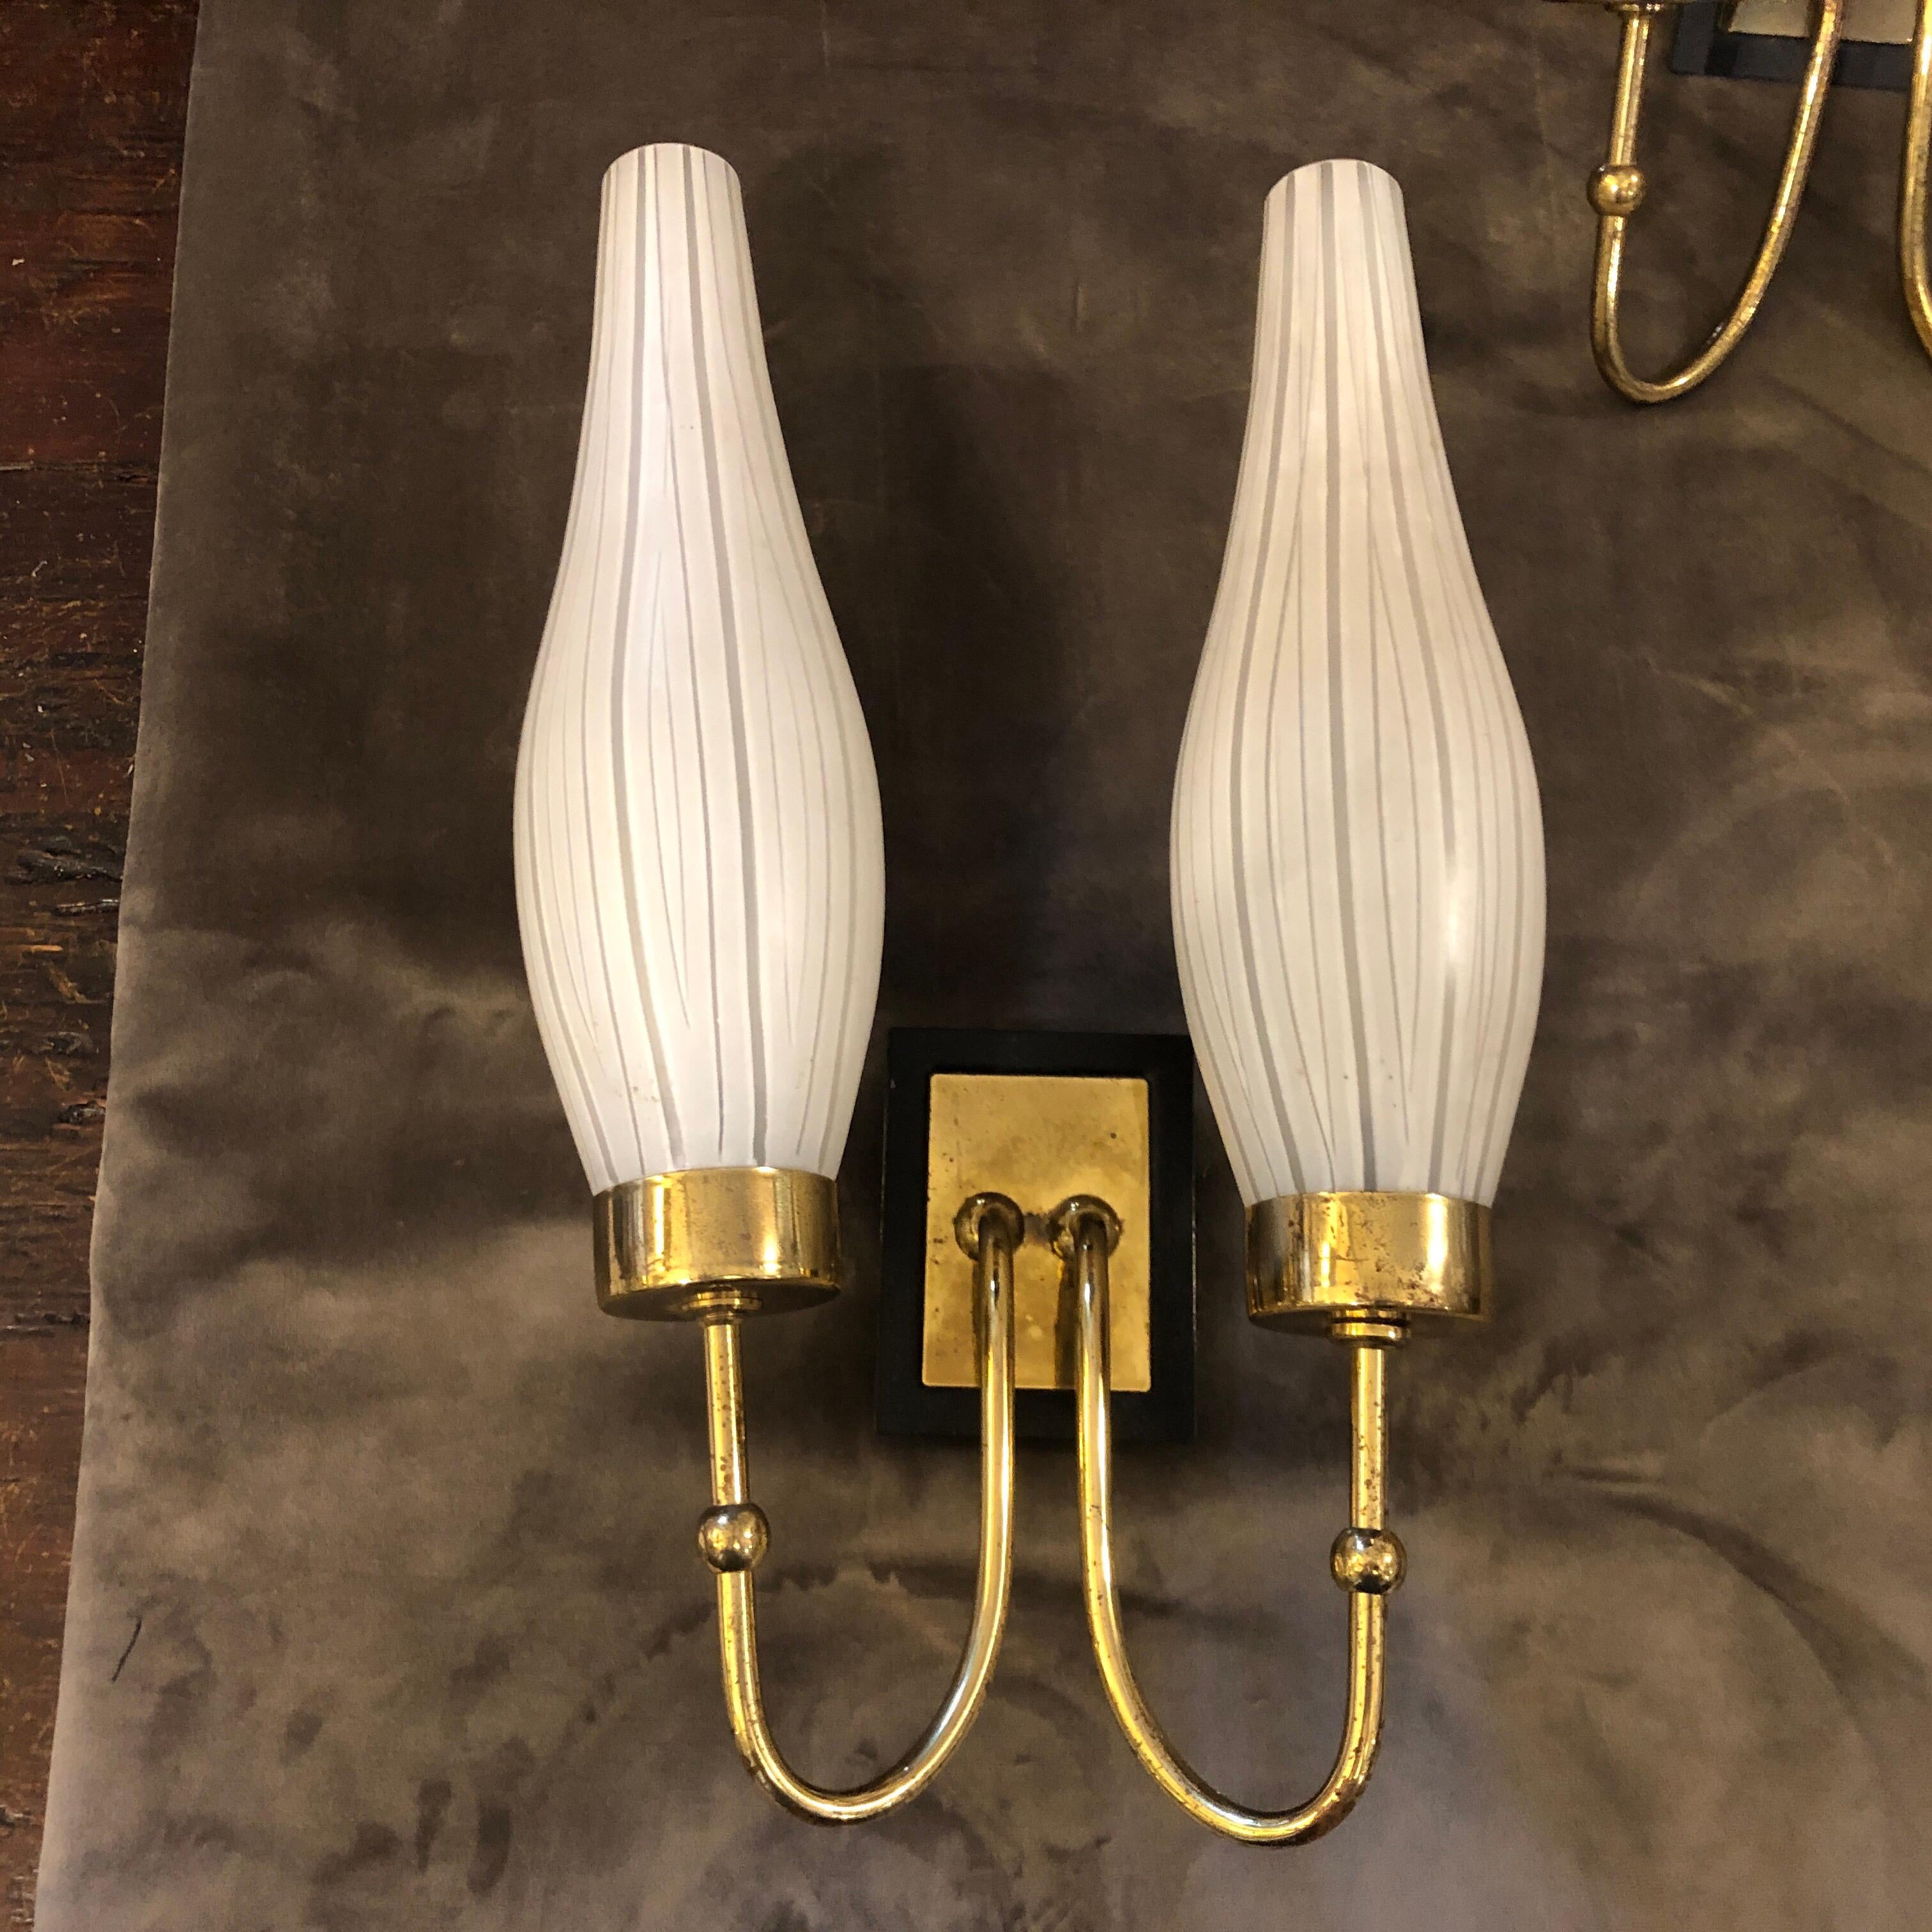 Two Mid-Century Modern brass and striped white murano glass wall sconces designed and manufactured in Italy in the 1950s, they work 110-240 volts and need regular e14 bulbs. Brass is in original patina and that creates a good vintage look.